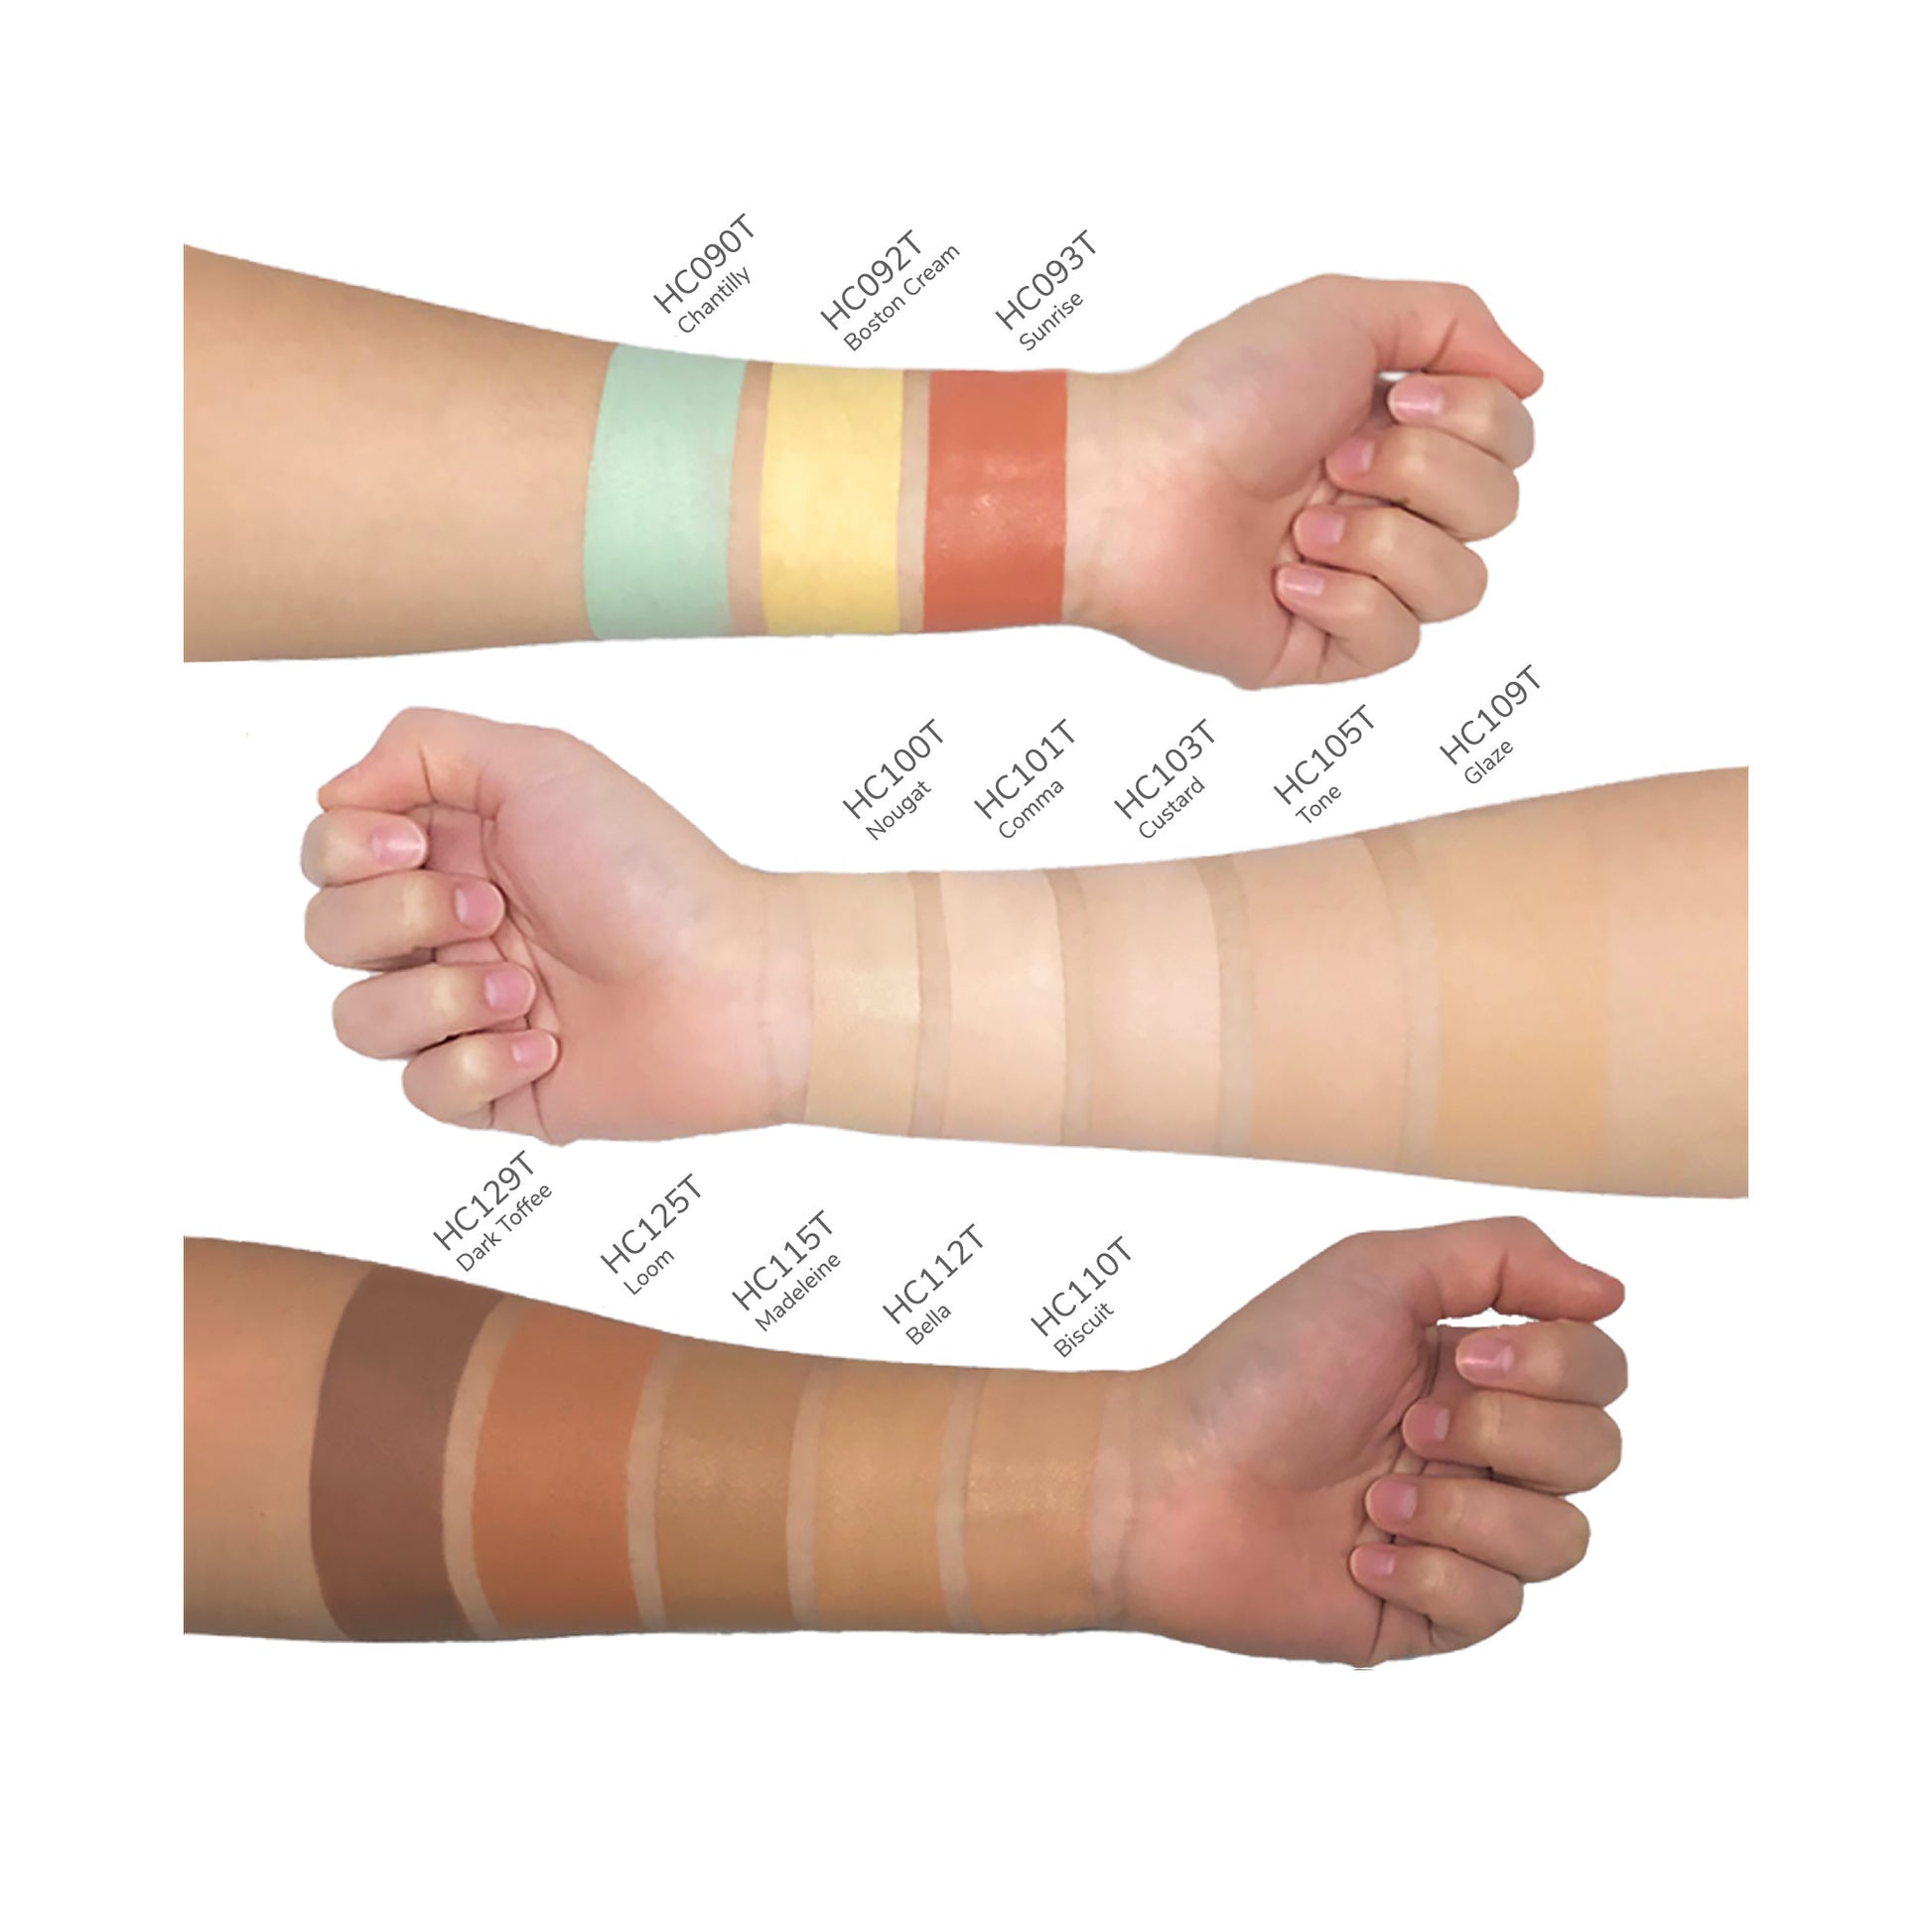 13 shades of Cruisin Organics concealer to choose from. Buy more and try them out for what is best for your skin tone.